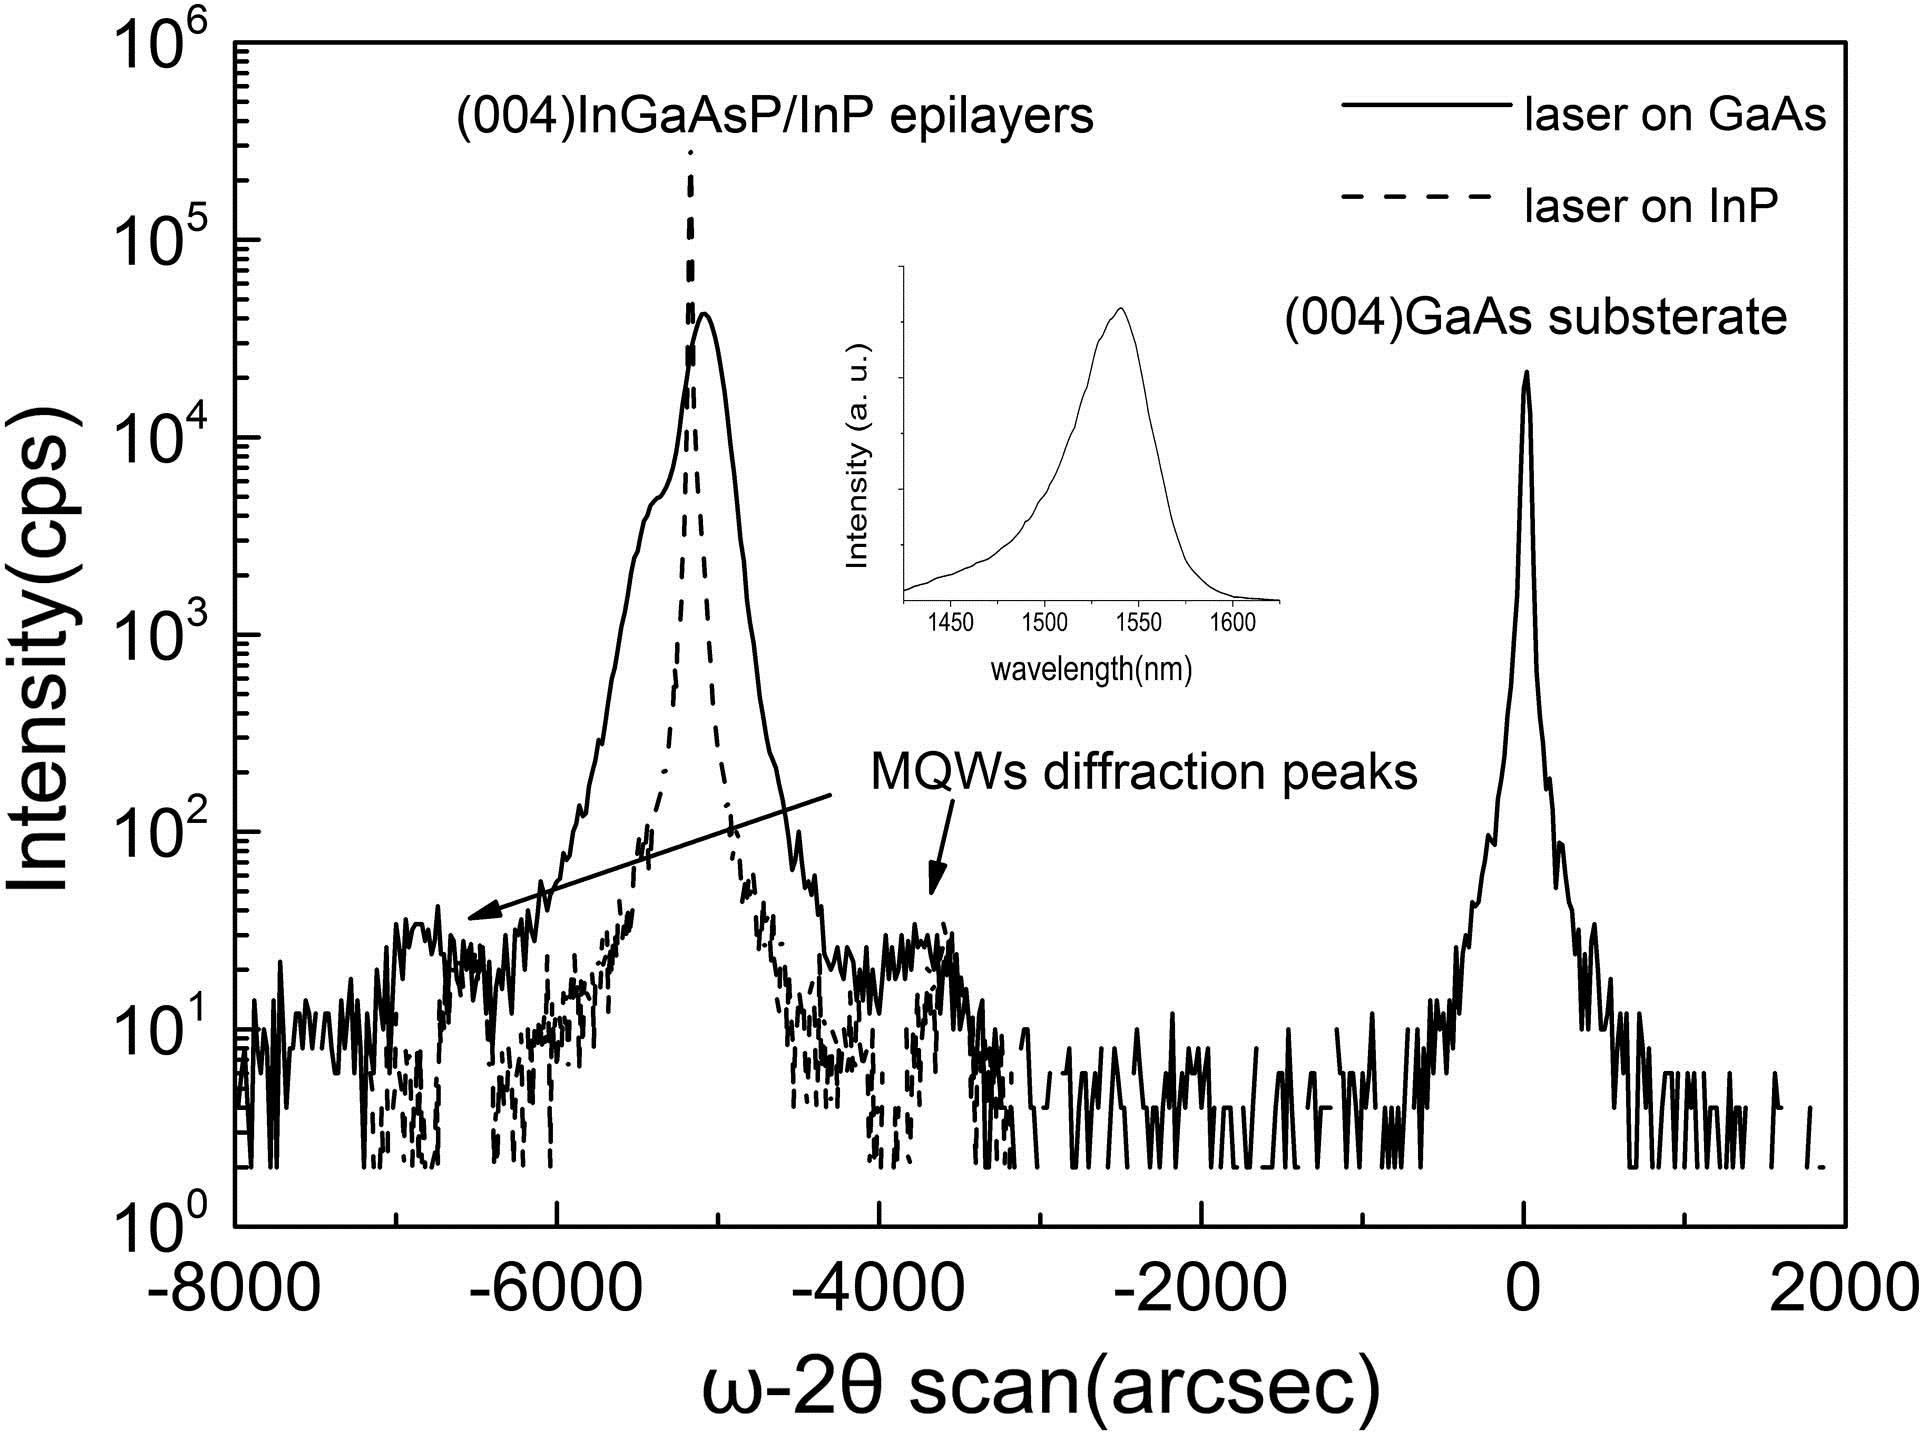 Rocking curve (ω−2θ scan) of MQWs laser on GaAs substrate (solid line) and on InP substrate (dotted line) in the GaAs (004) reflection. Inset shows RT PL photoluminescence spectrum of MQWs for InP/GaAs laser after removing the surface layers.